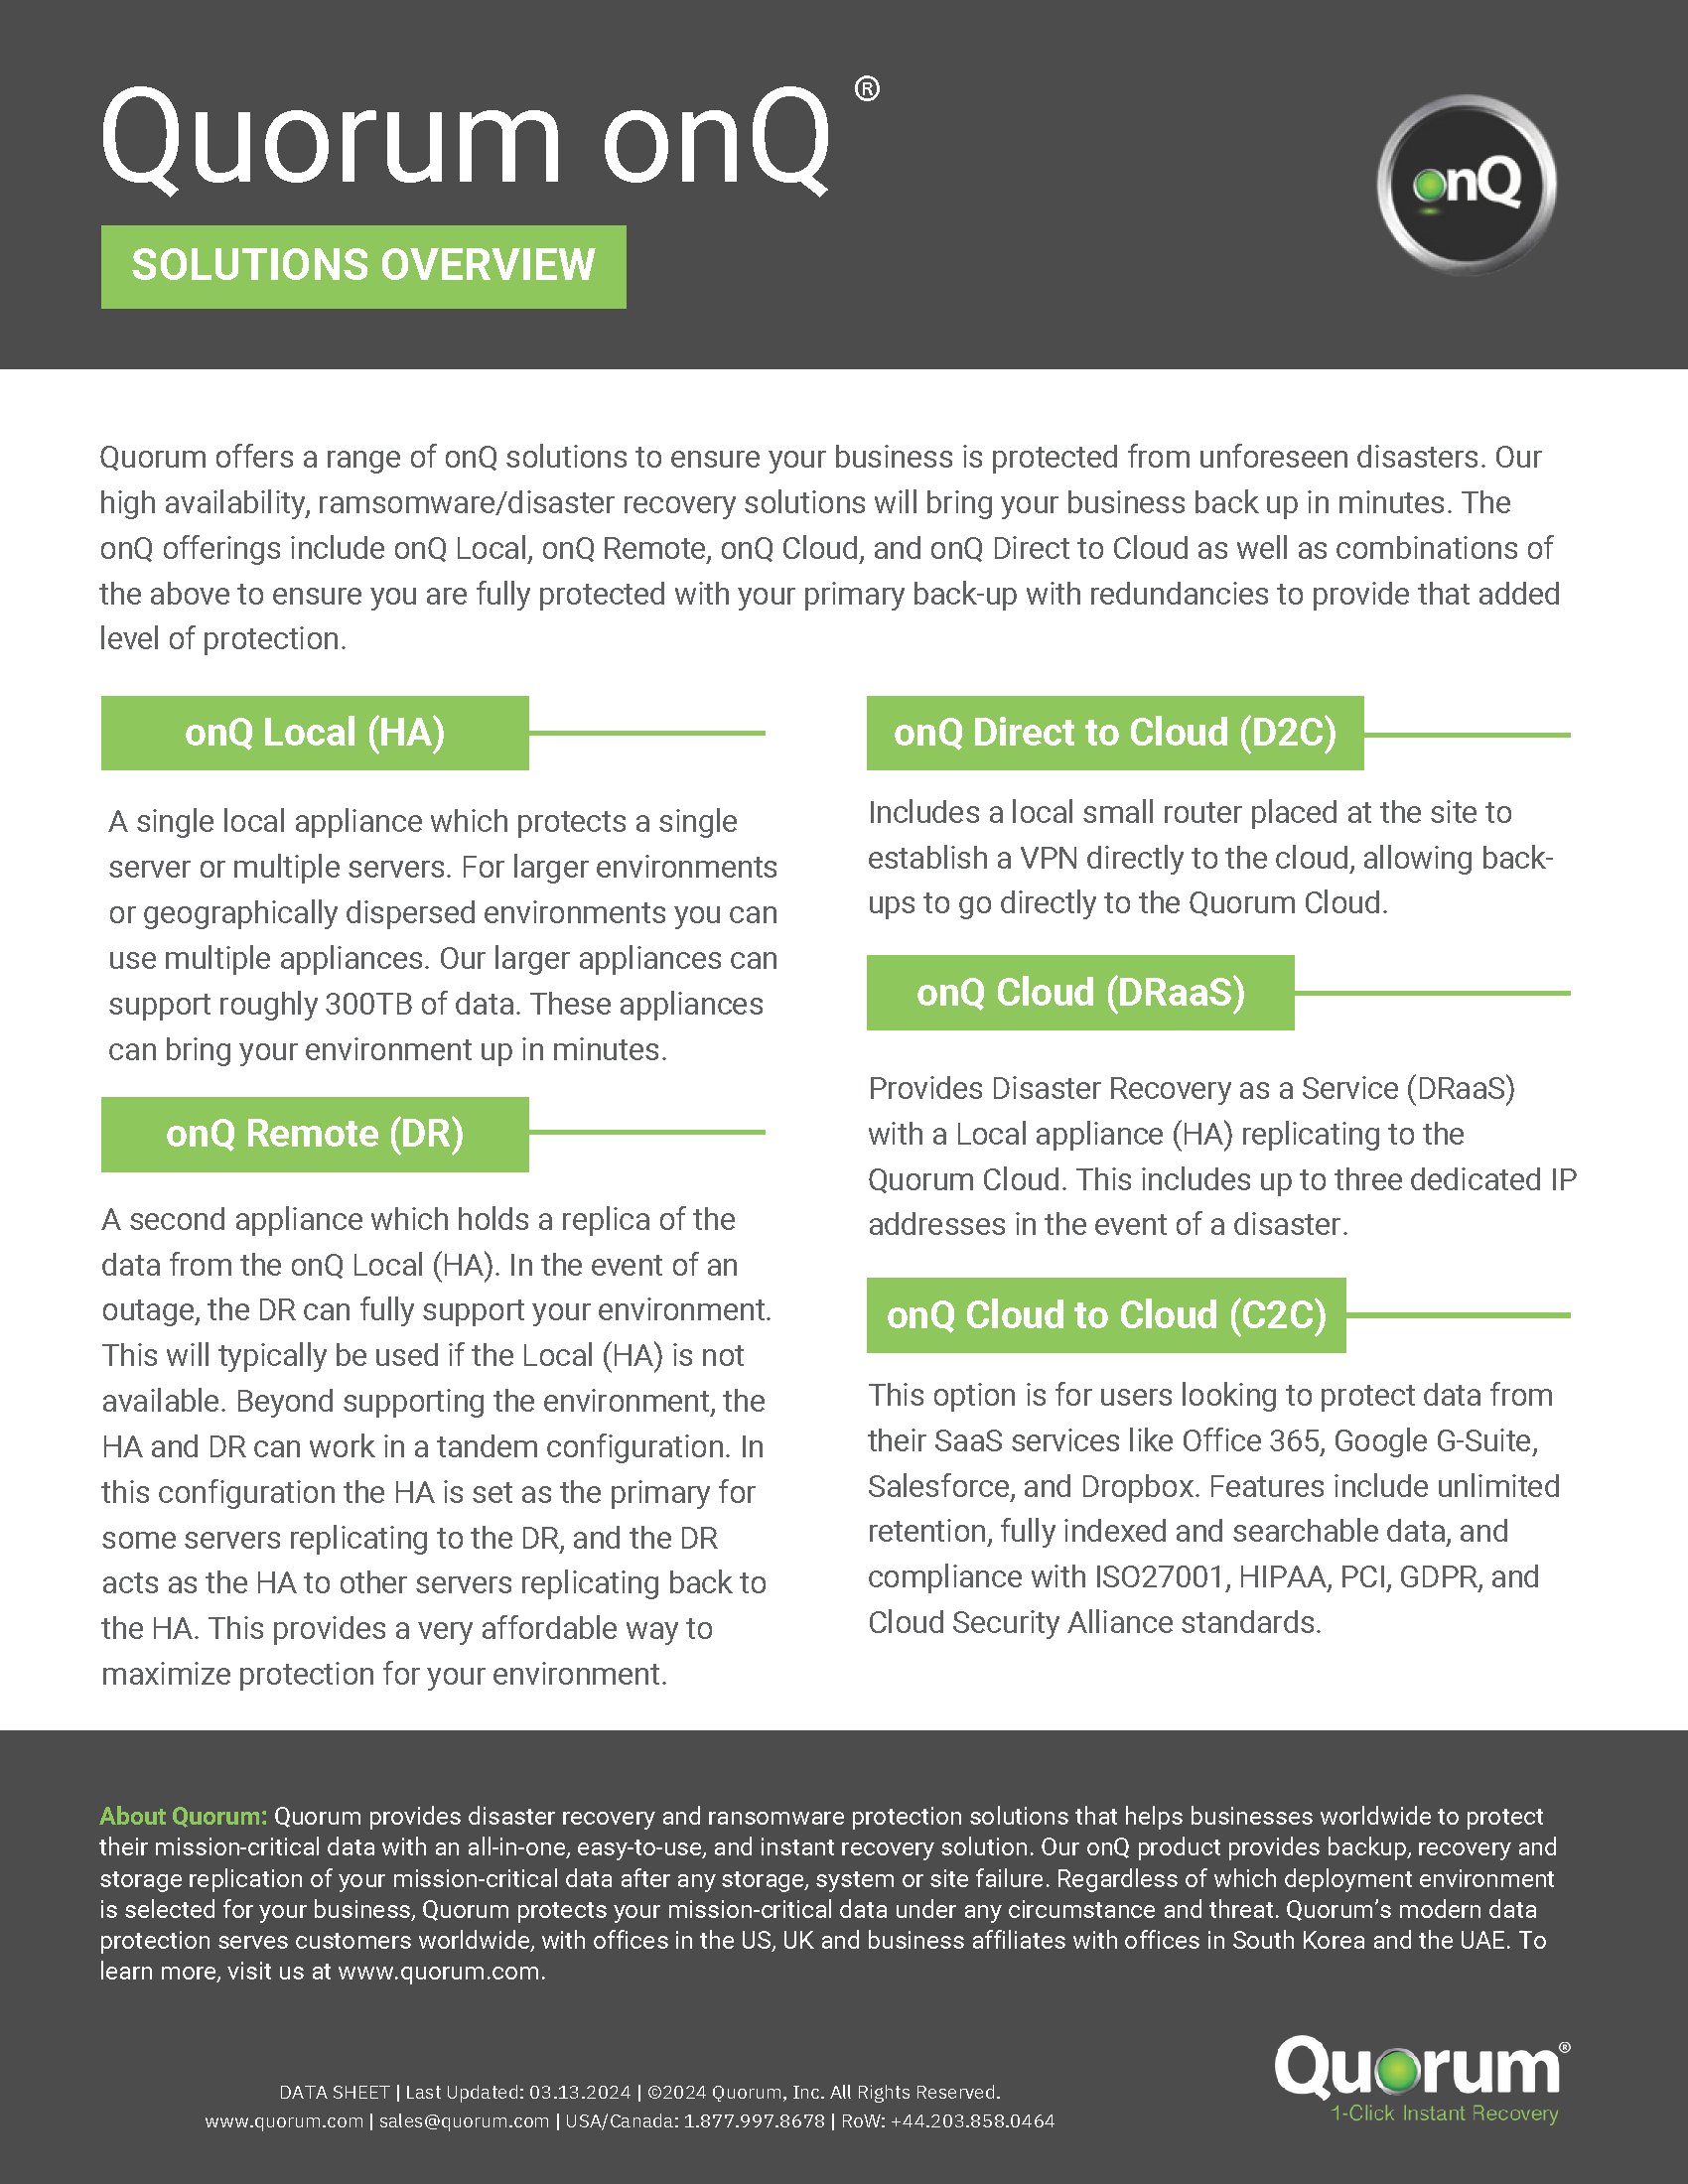 An informational flyer for Quorum onQ Solutions Overview. It describes various disaster recovery solutions: onQ Local (HA), onQ Remote (DR), onQ Direct to Cloud (D2C), onQ Cloud (DRaaS), and onQ Archive (Tape). The company logo and contact information are at the bottom.